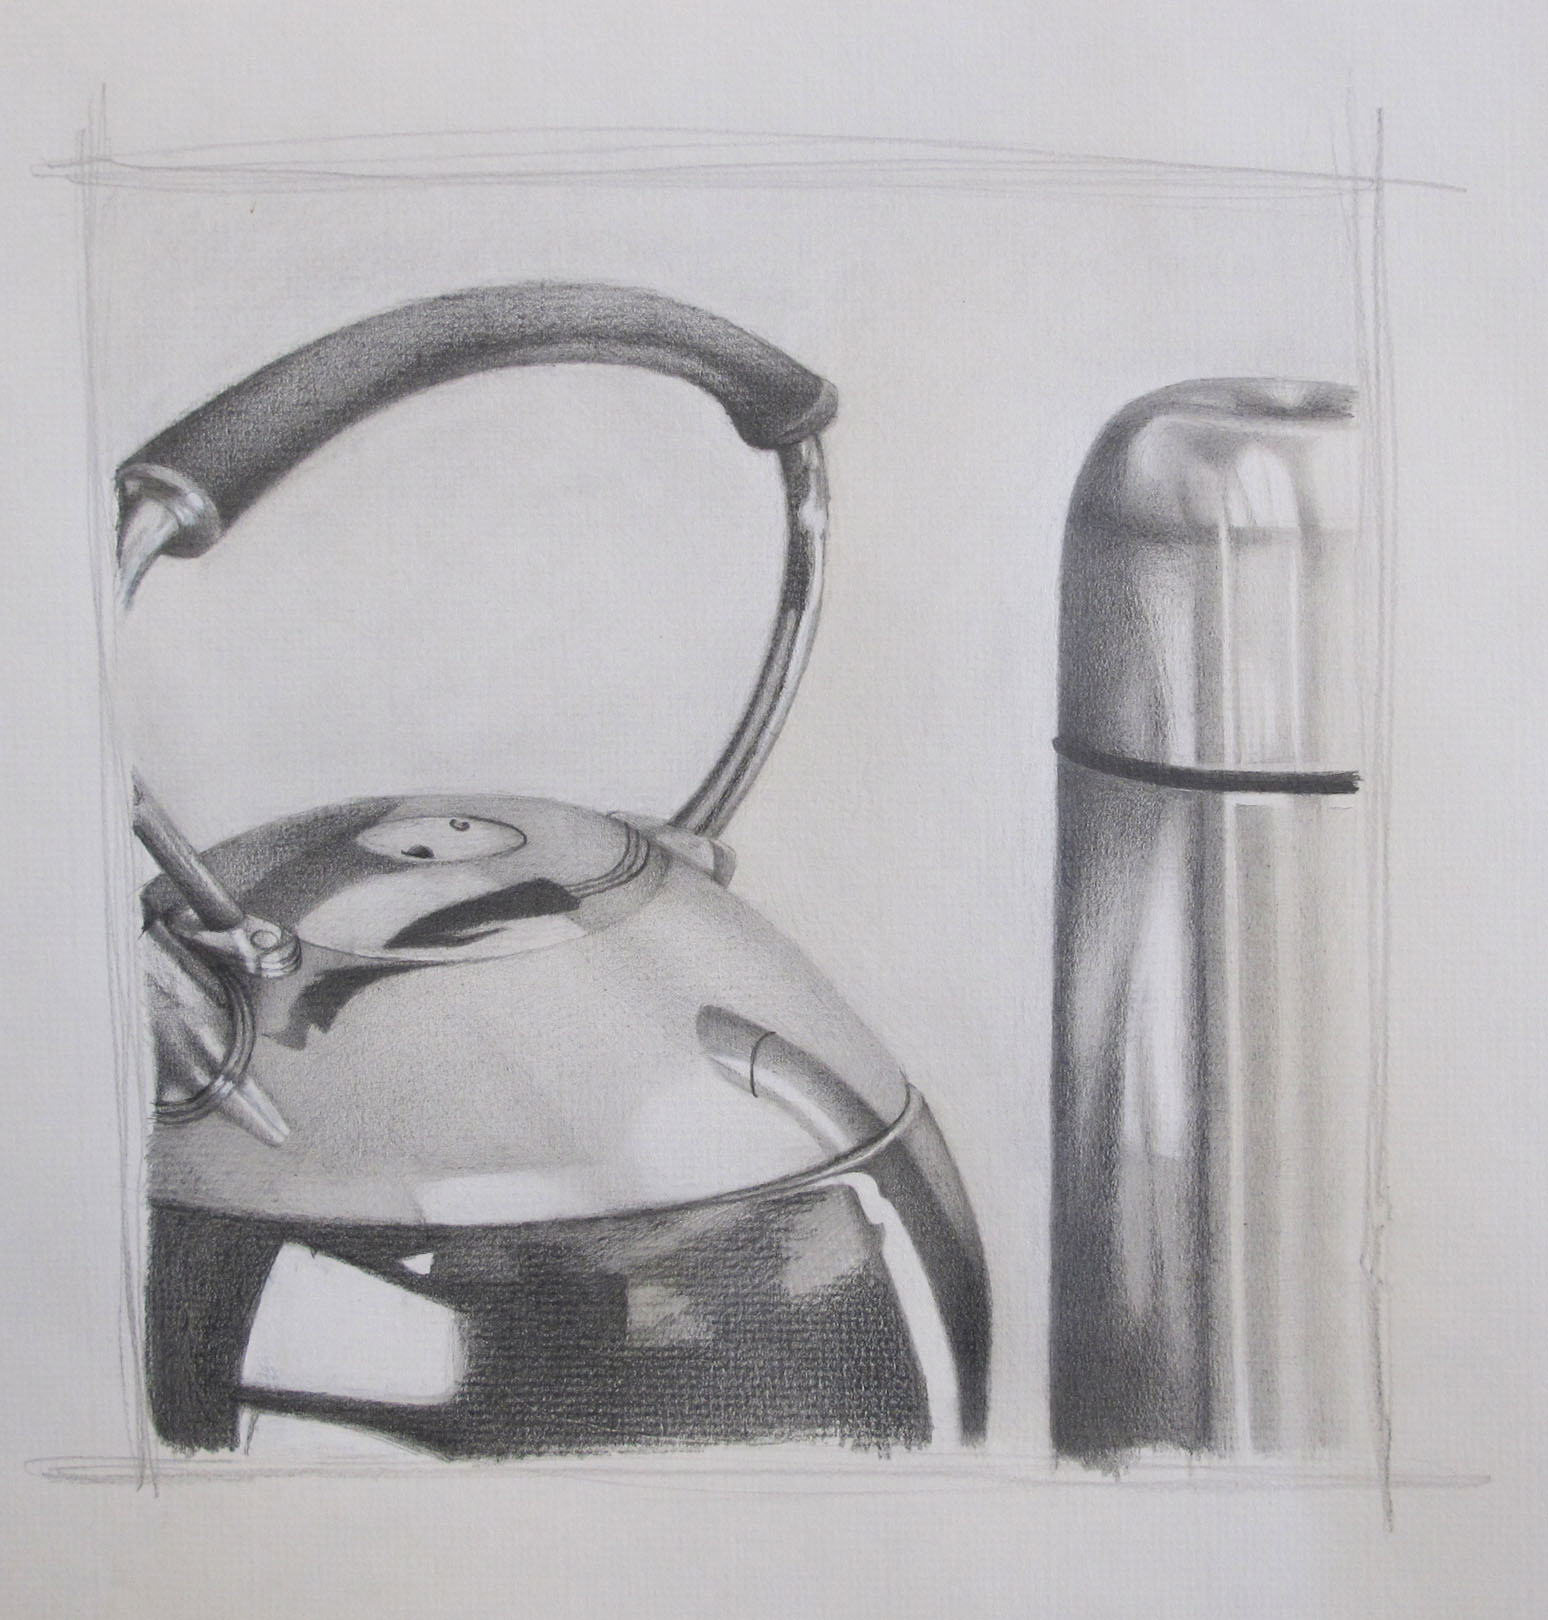 Arislenny Corcino. Drawing II. Stil life drawing- charcoal graphite on paper. 